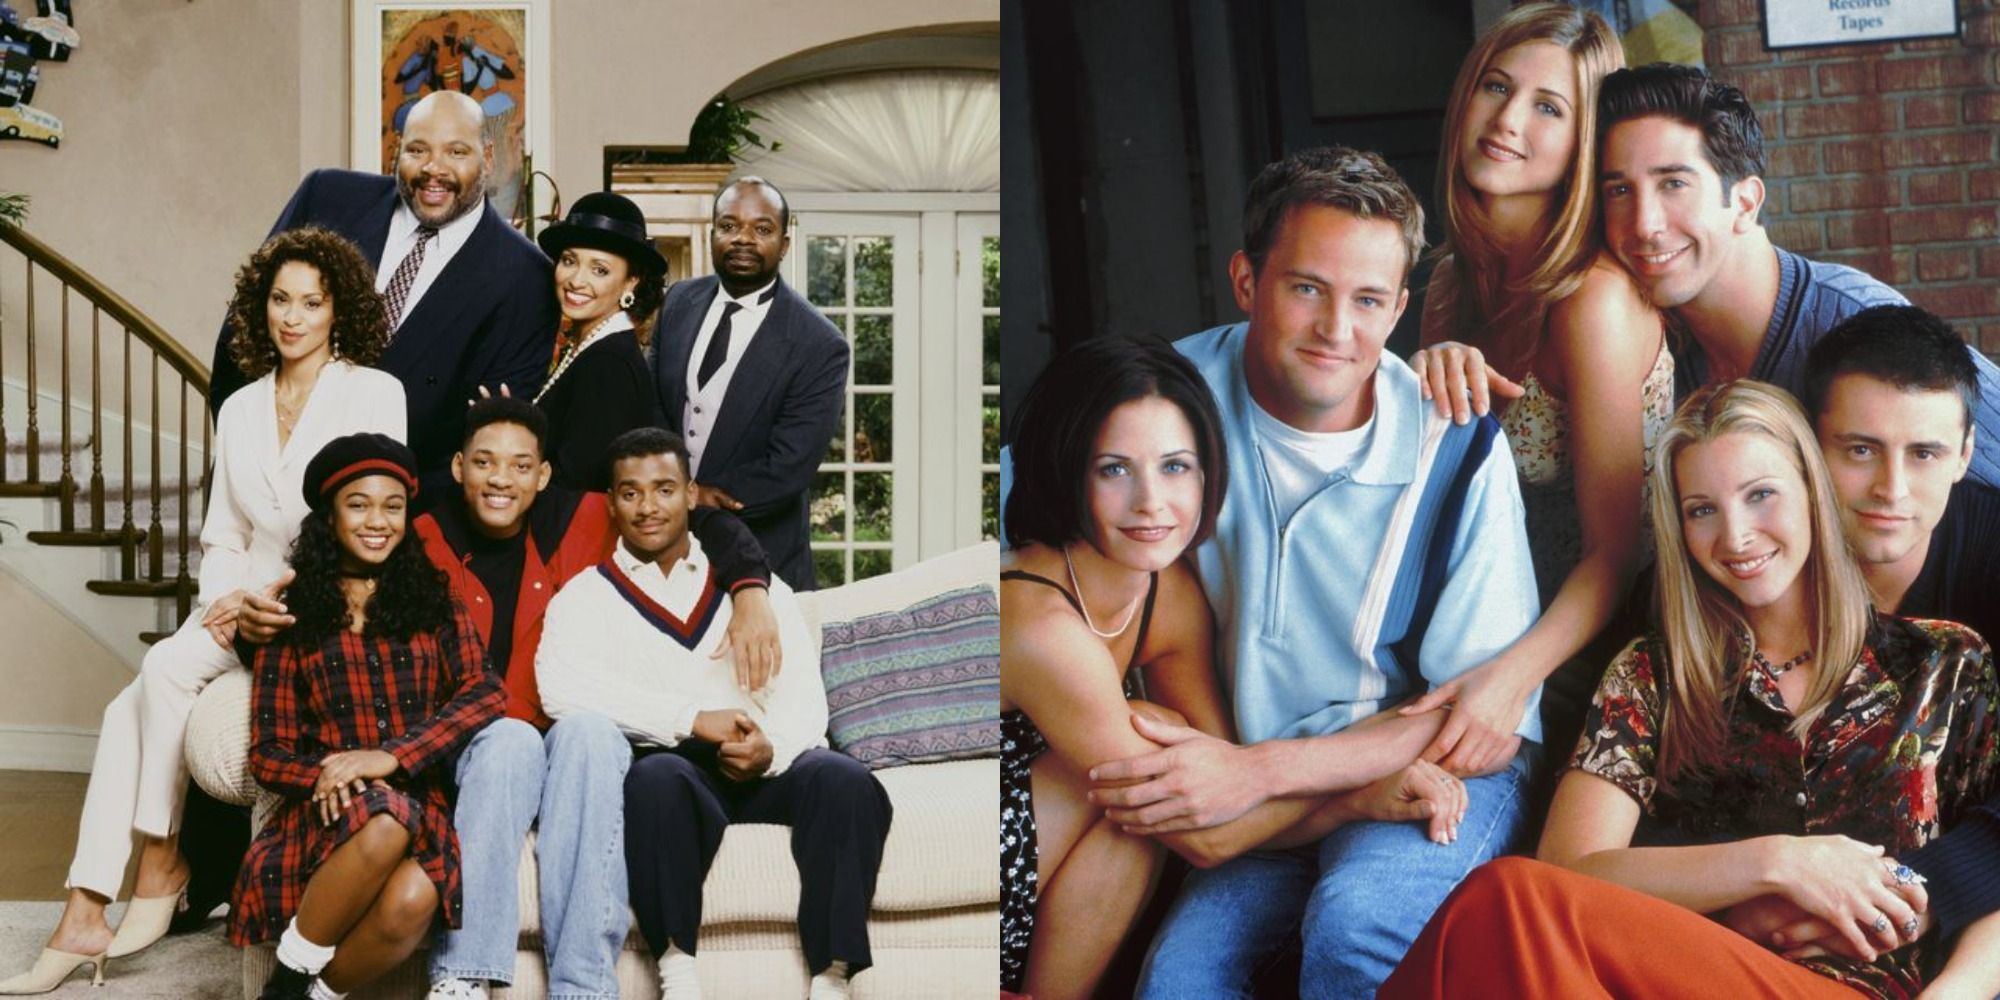 Split image showing the cast of The Fresh Prince of Bel Air and Friends